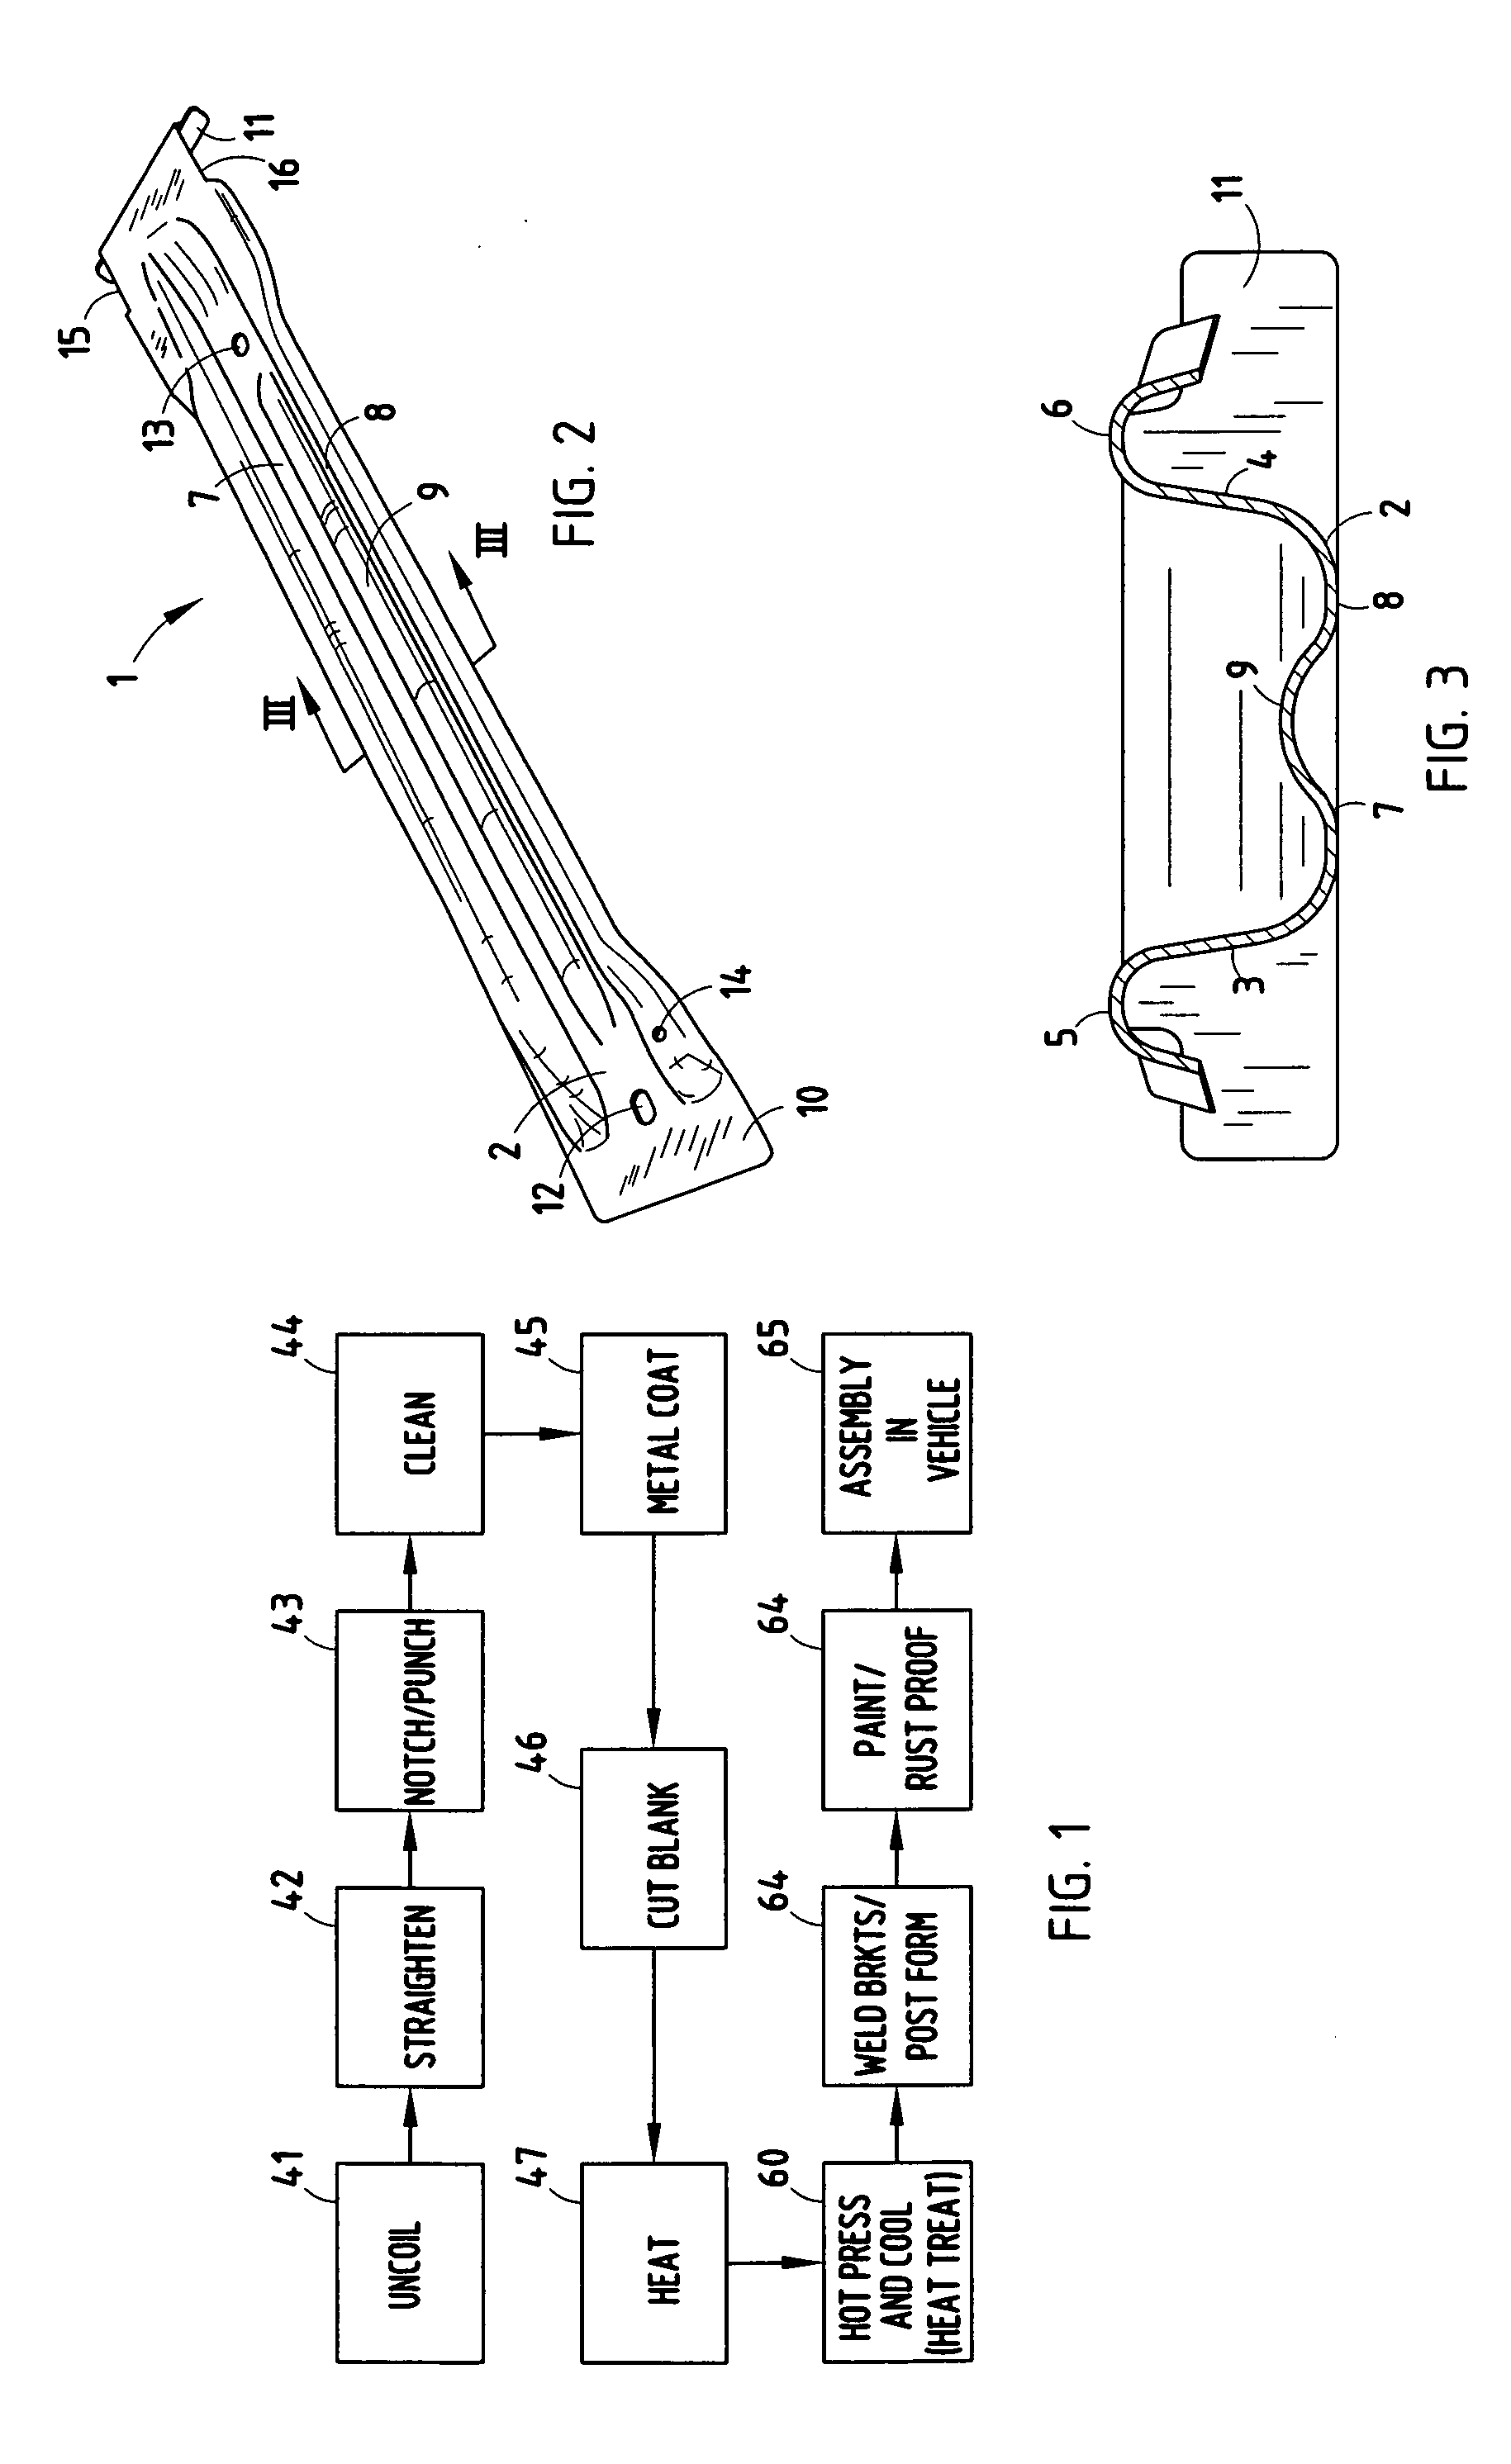 Method for making structural automotive components and the like